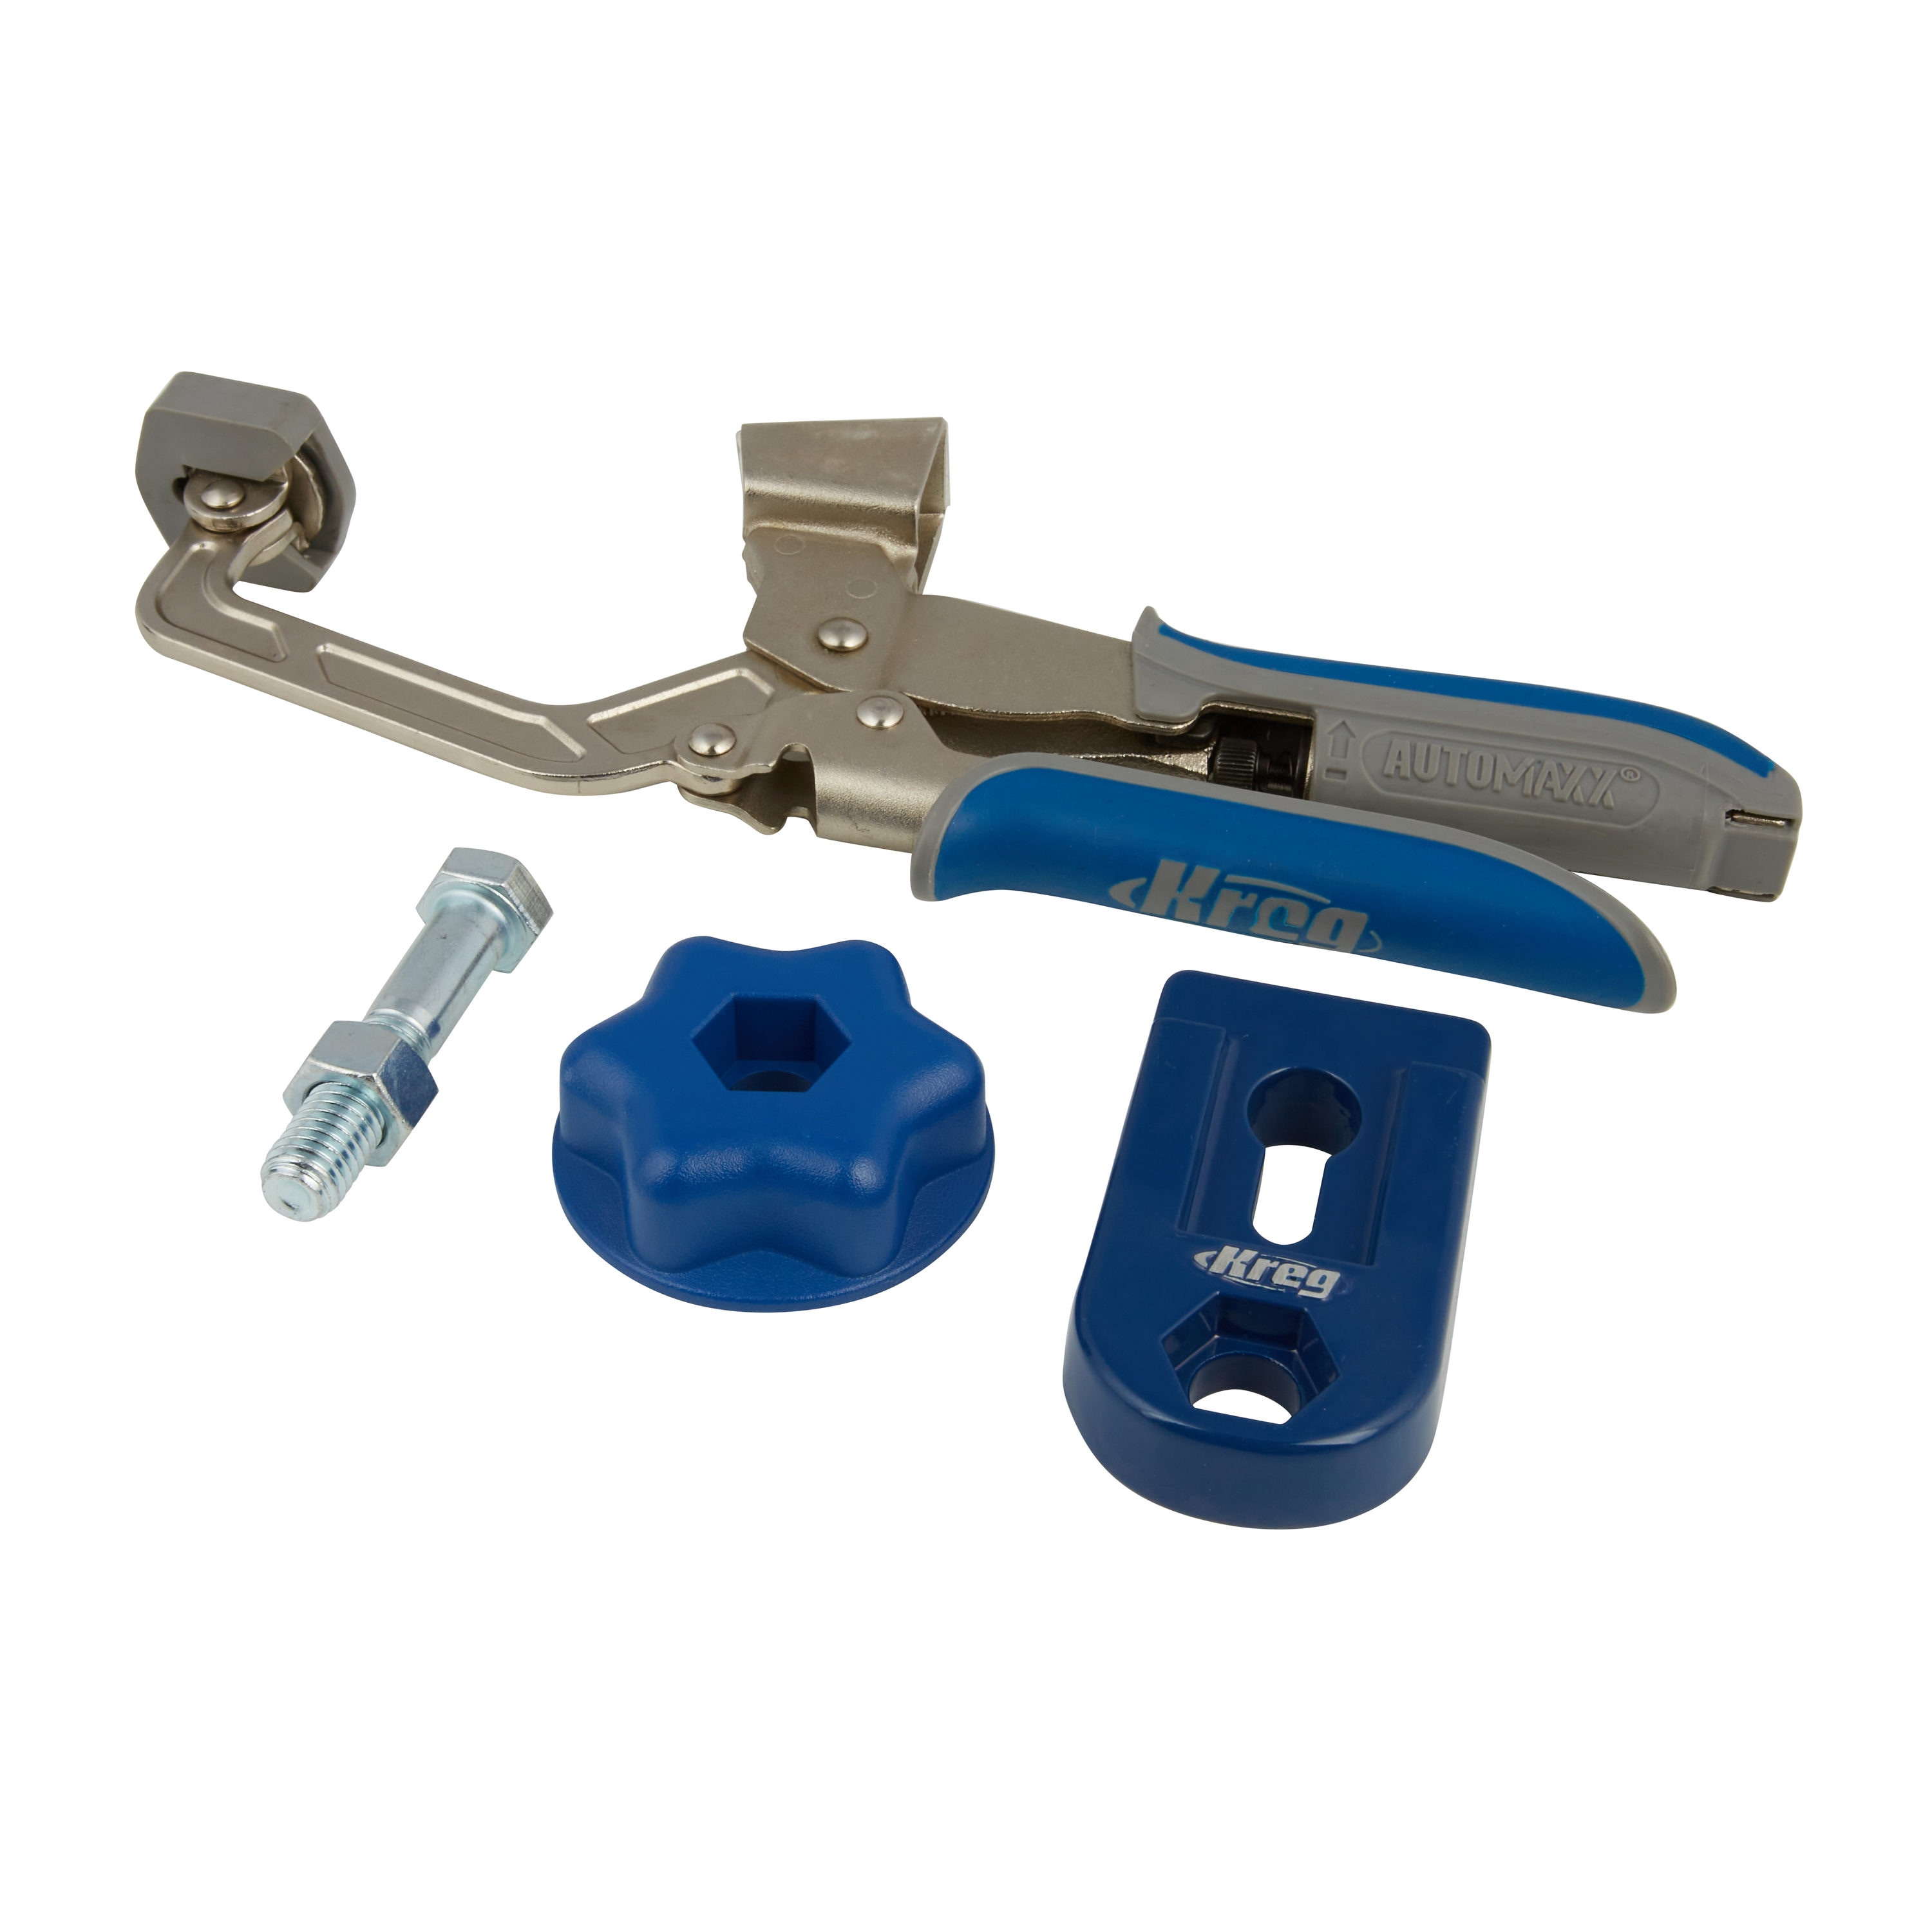 Kreg 3-1/2-in Steel Spring Clamp with 3 Inch Throat Depth and 500